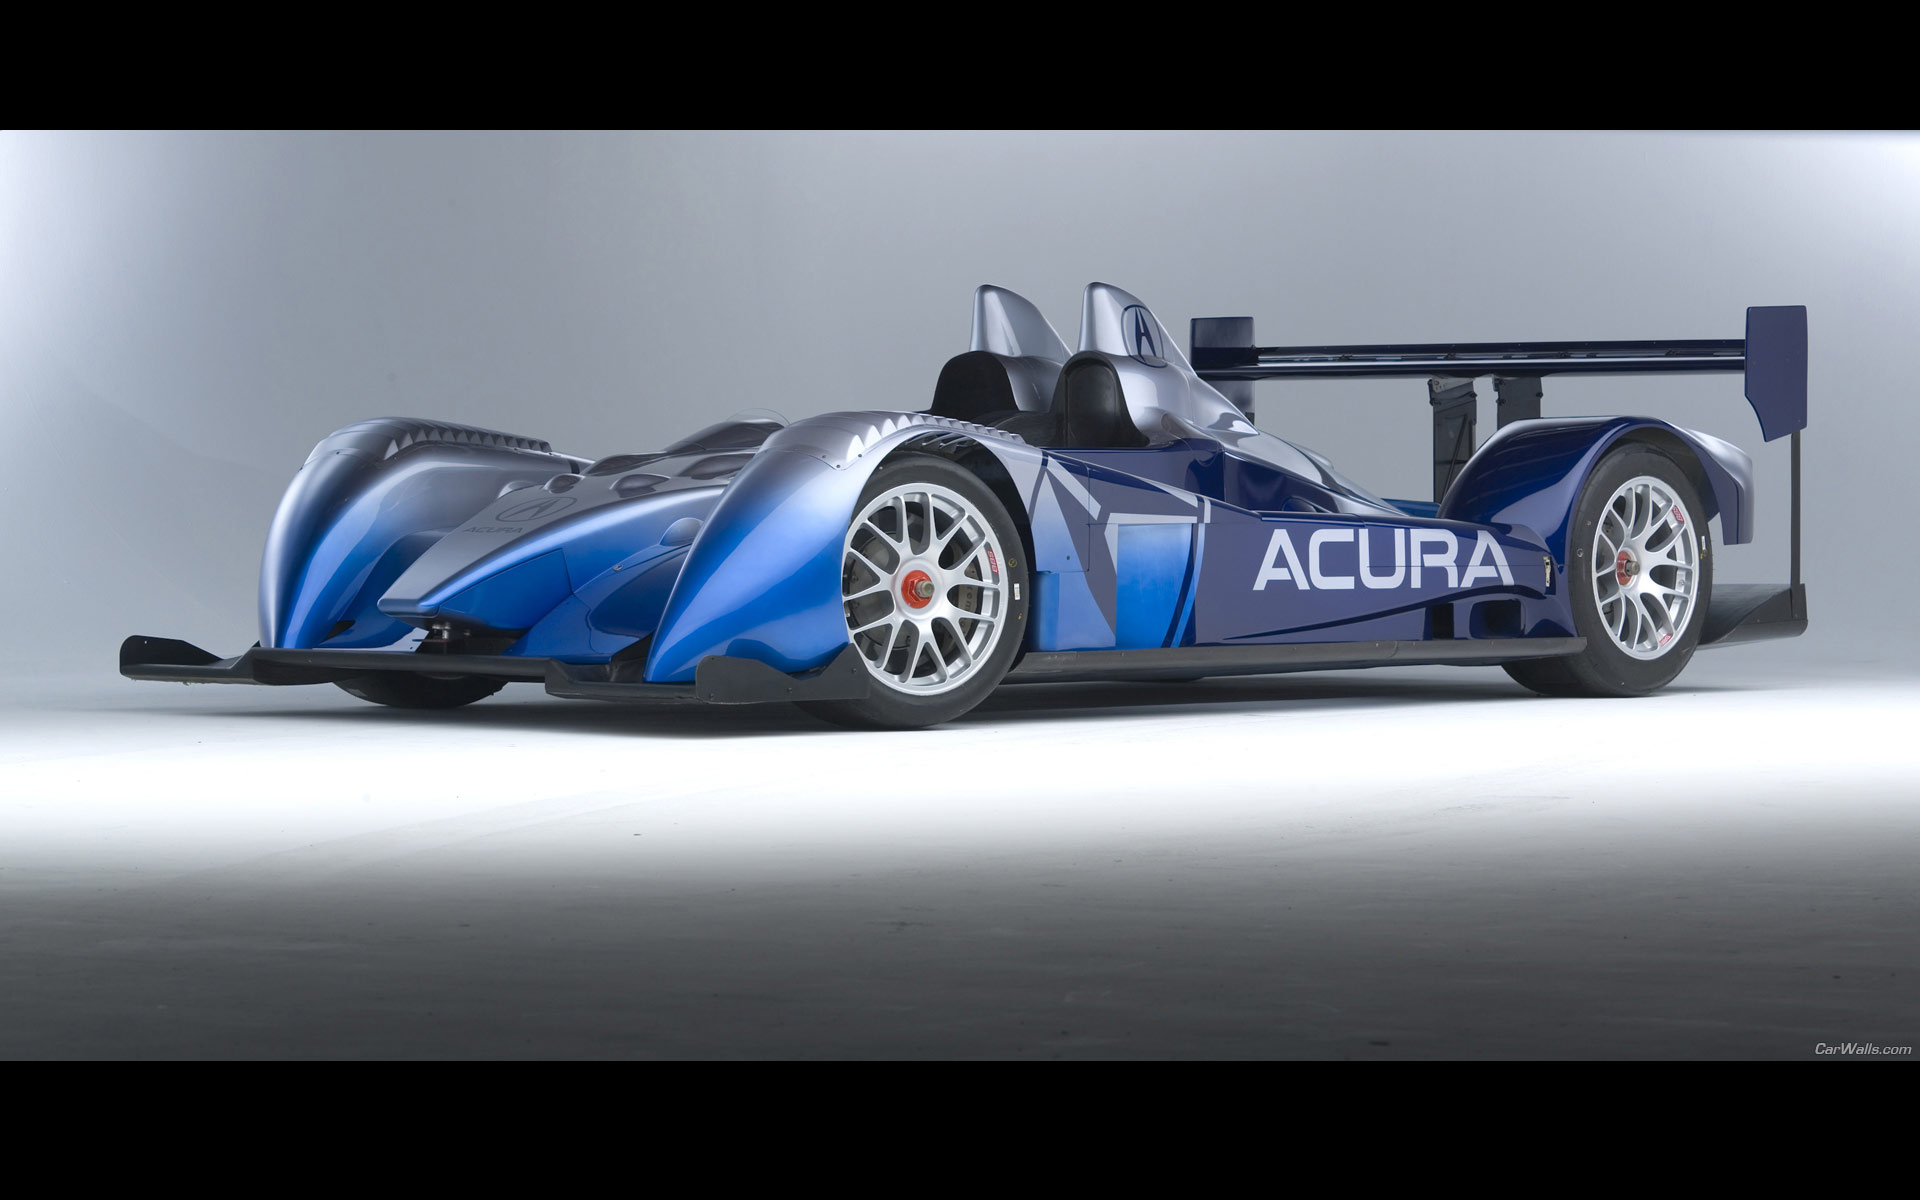 Download full size Acura American Le Mans Series Concept Car Acura wallpaper / 1920x1200